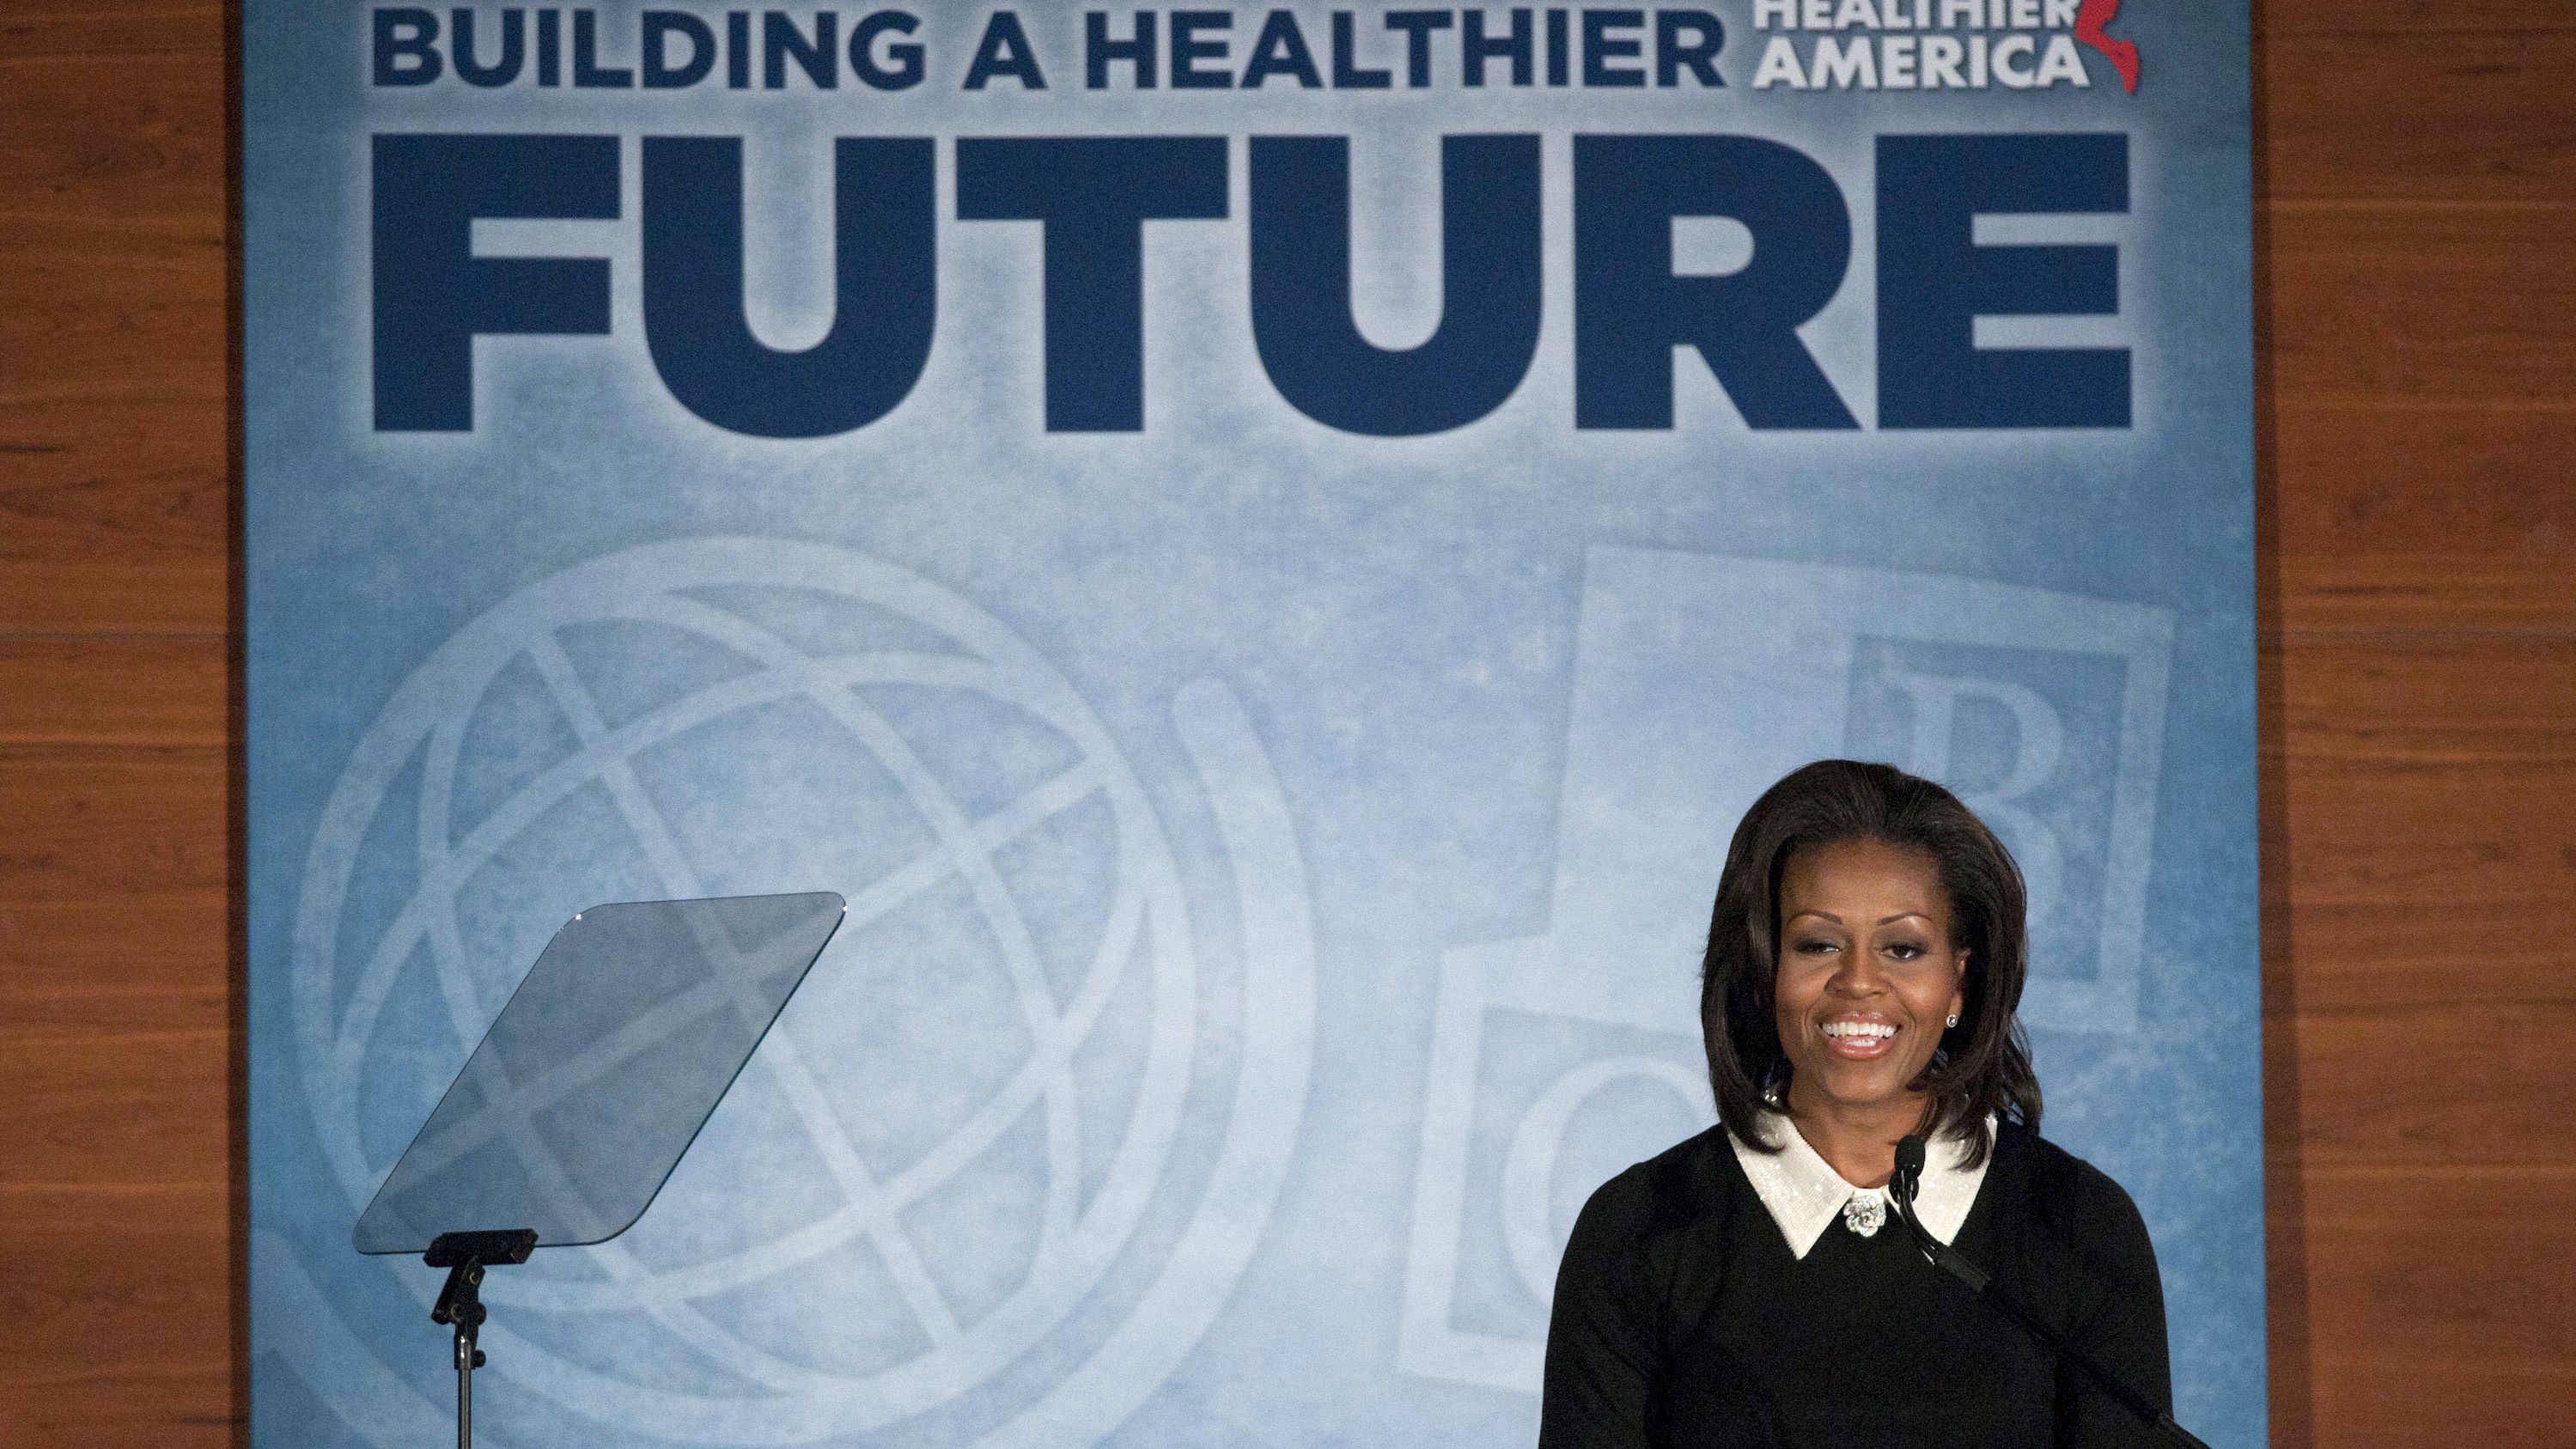 Michelle Obama speaks during the Building a Healthier Future summit on November 30, 2011, in Washington.